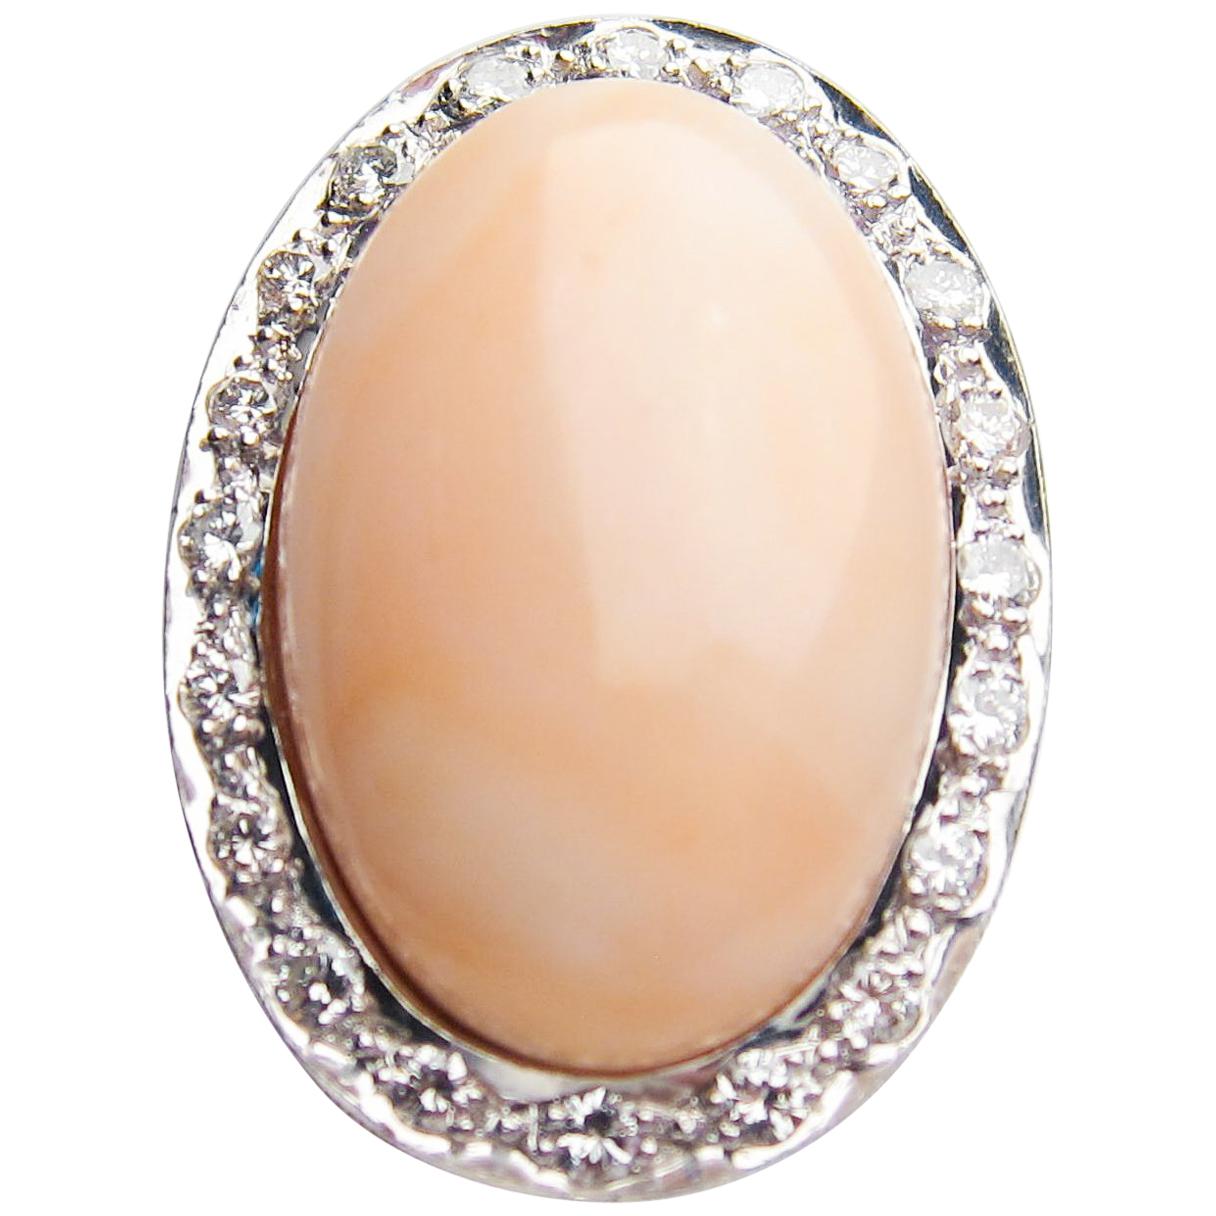 Midcentury Palladium Diamond and 17.3 Carat Coral Cabochon Cocktail Ring For Sale